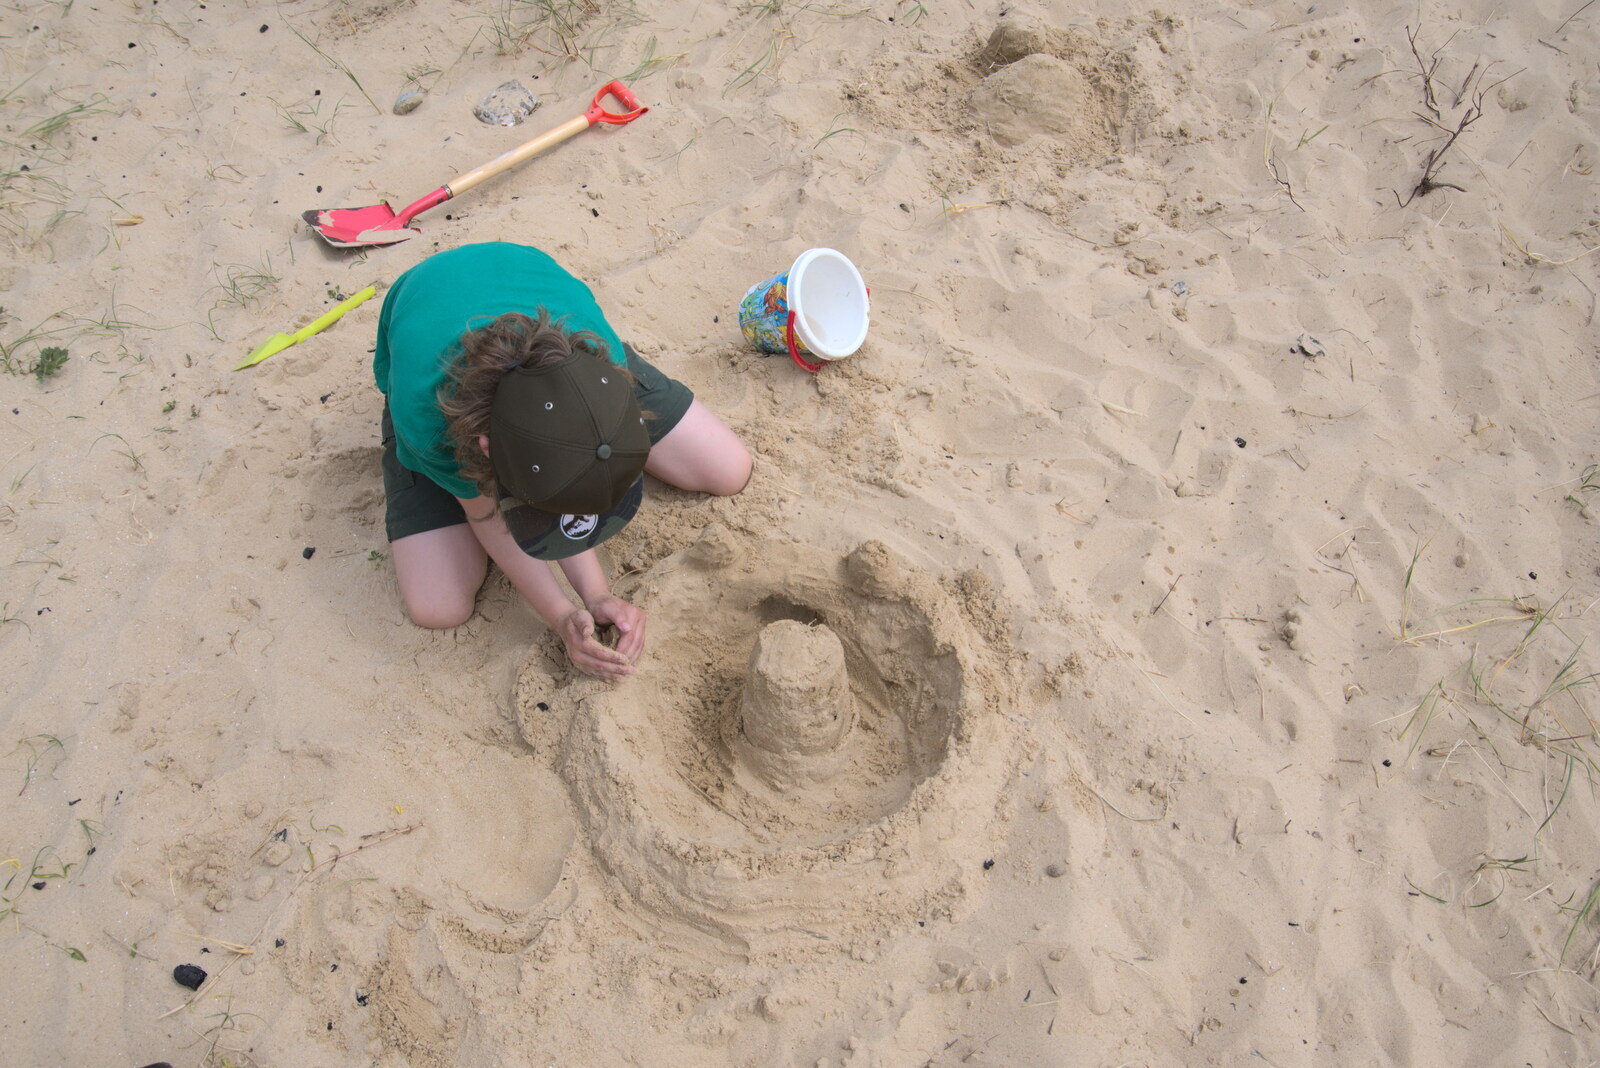 Fred constructs a sand castle from A Return to Southwold, Suffolk - 14th June 2020